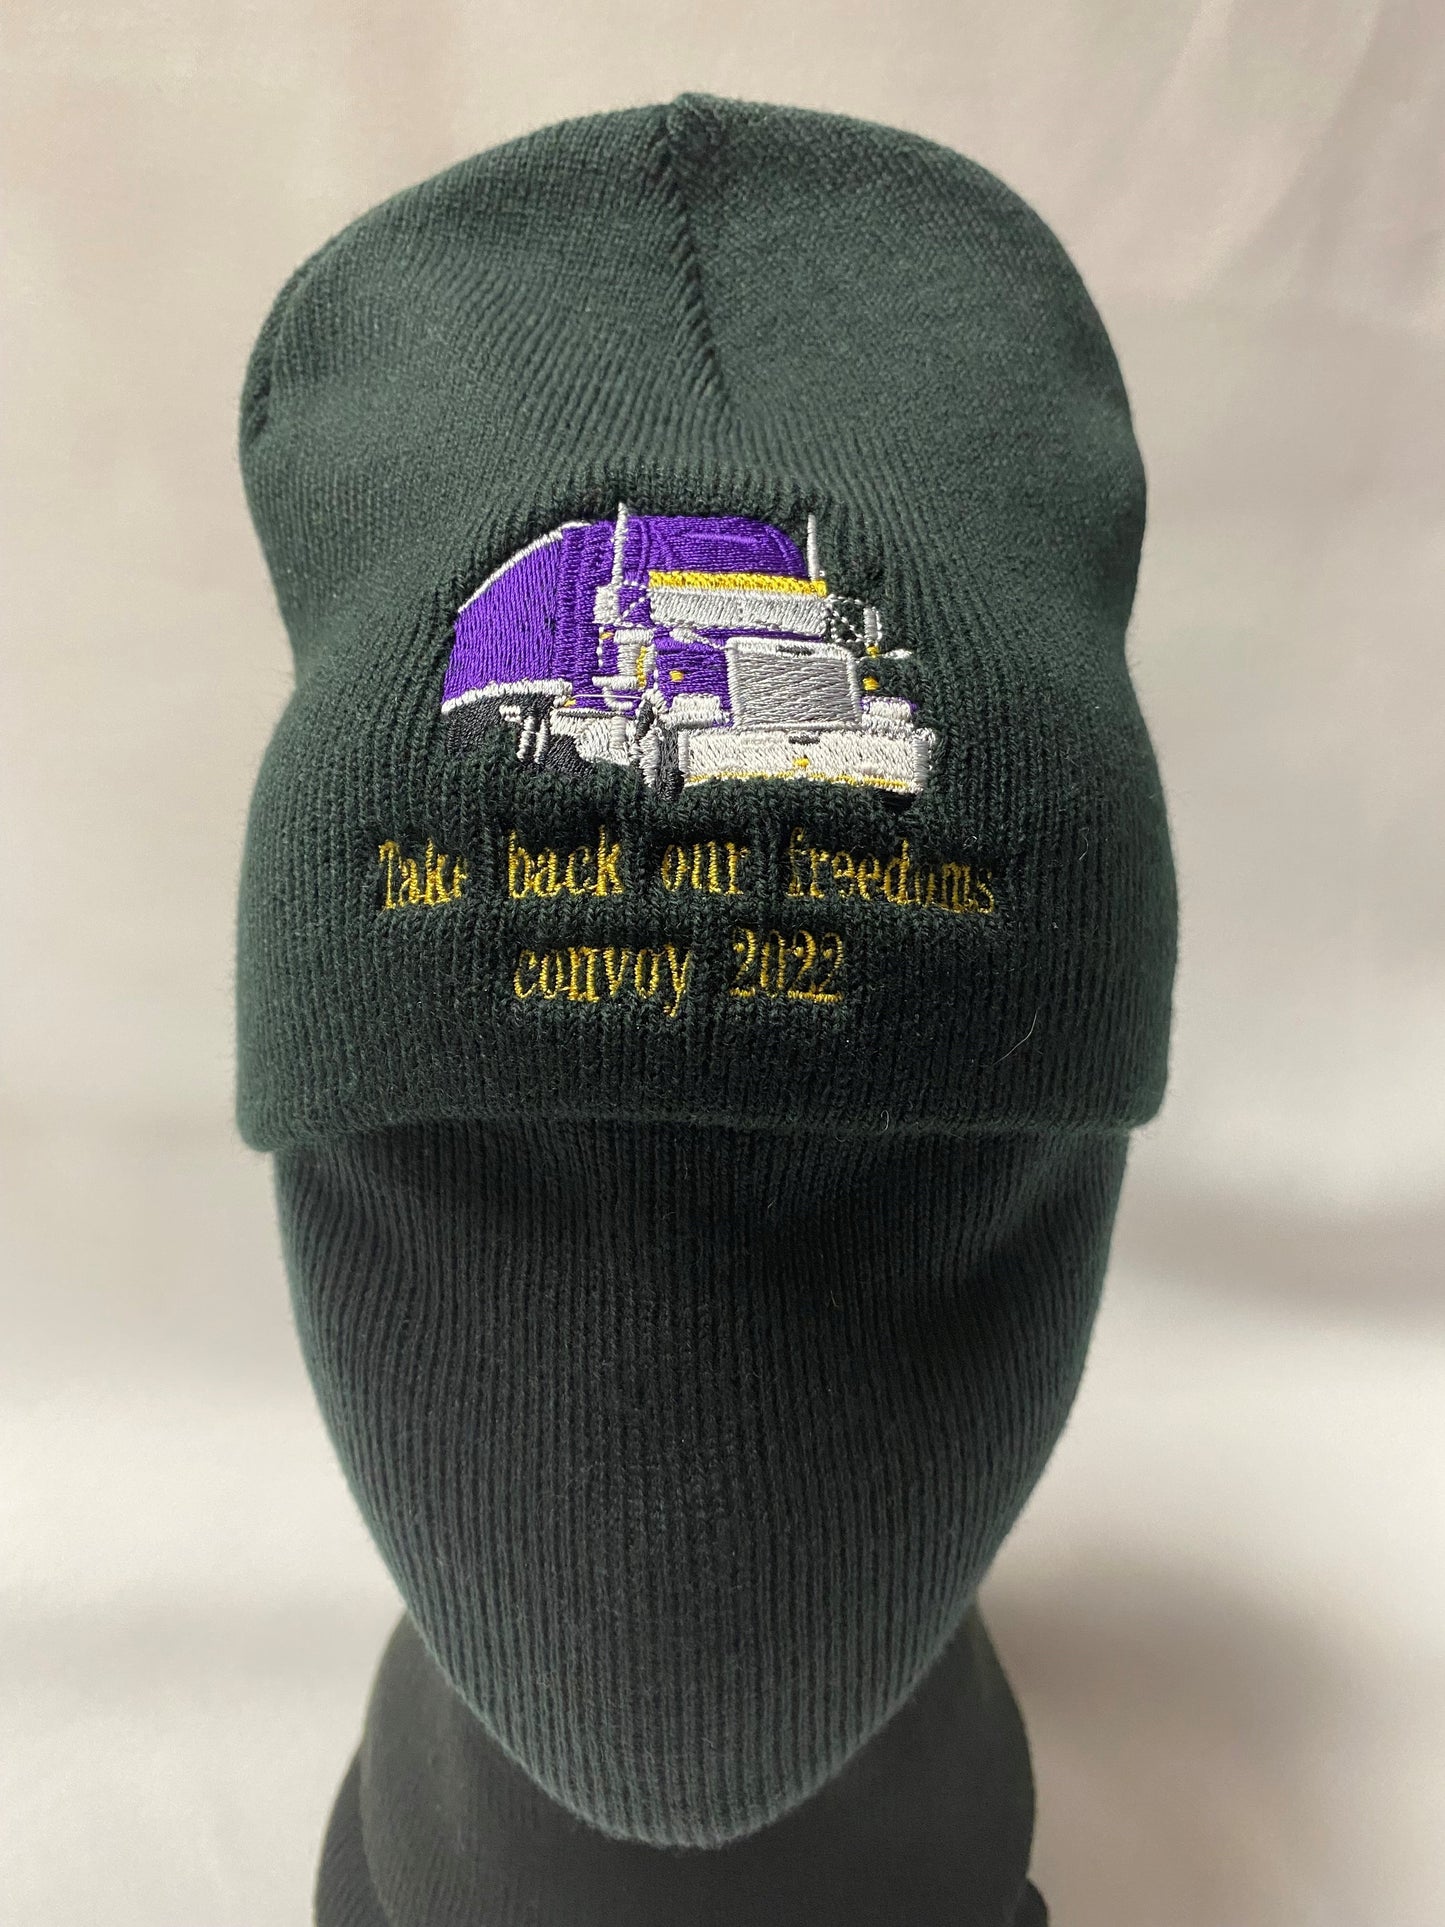 TRUCKER TOQUE no rim multiple colors: "Take back our freedoms convoy 2022"